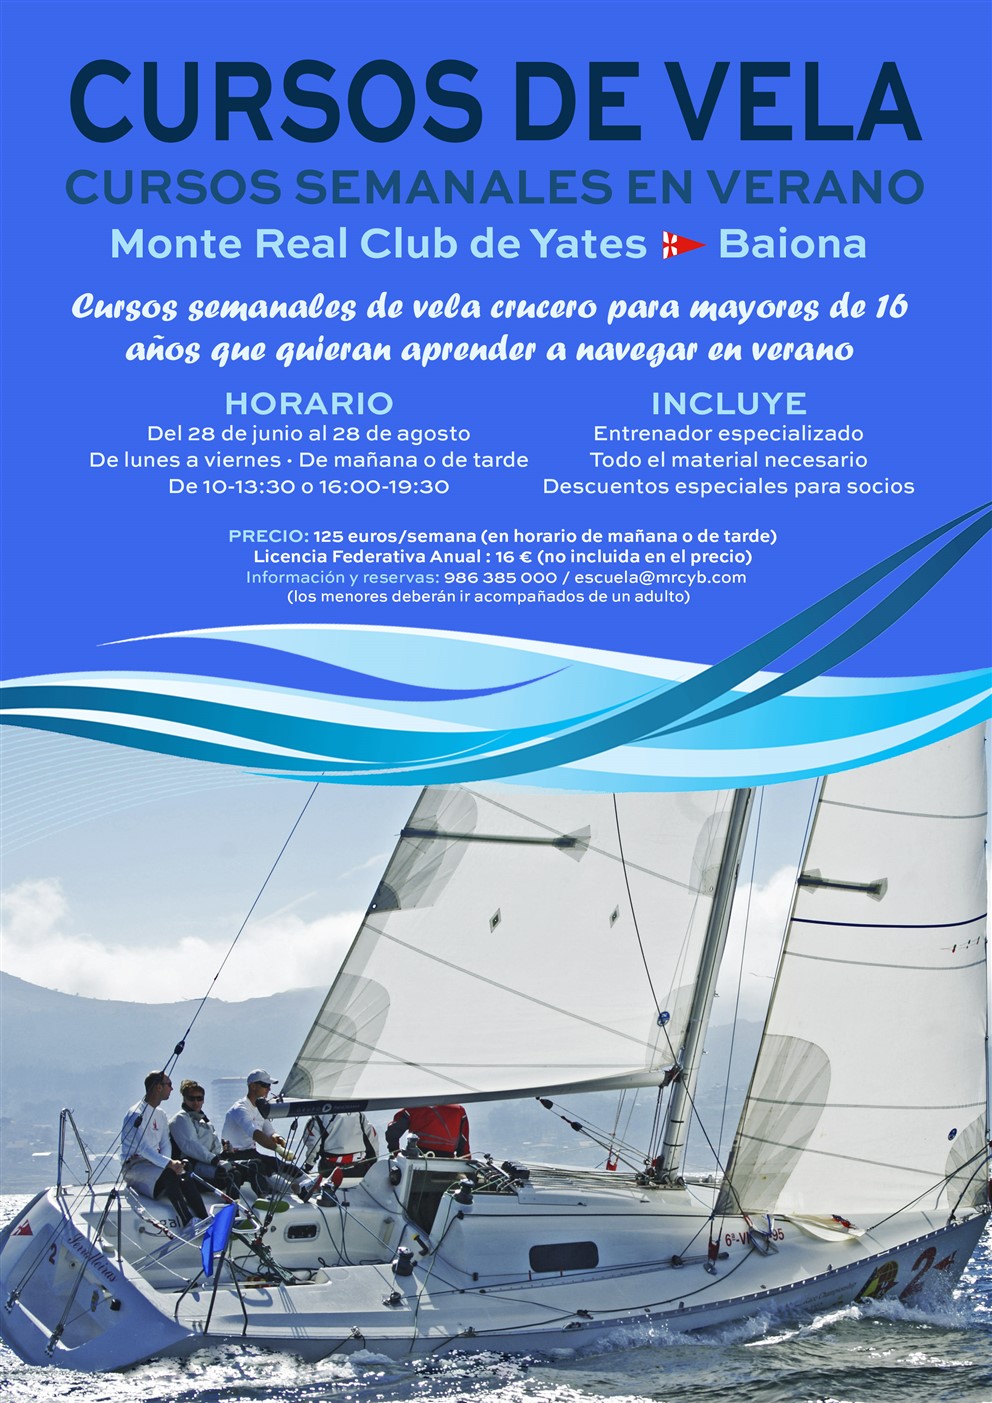 Sailing courses in Baiona for adults